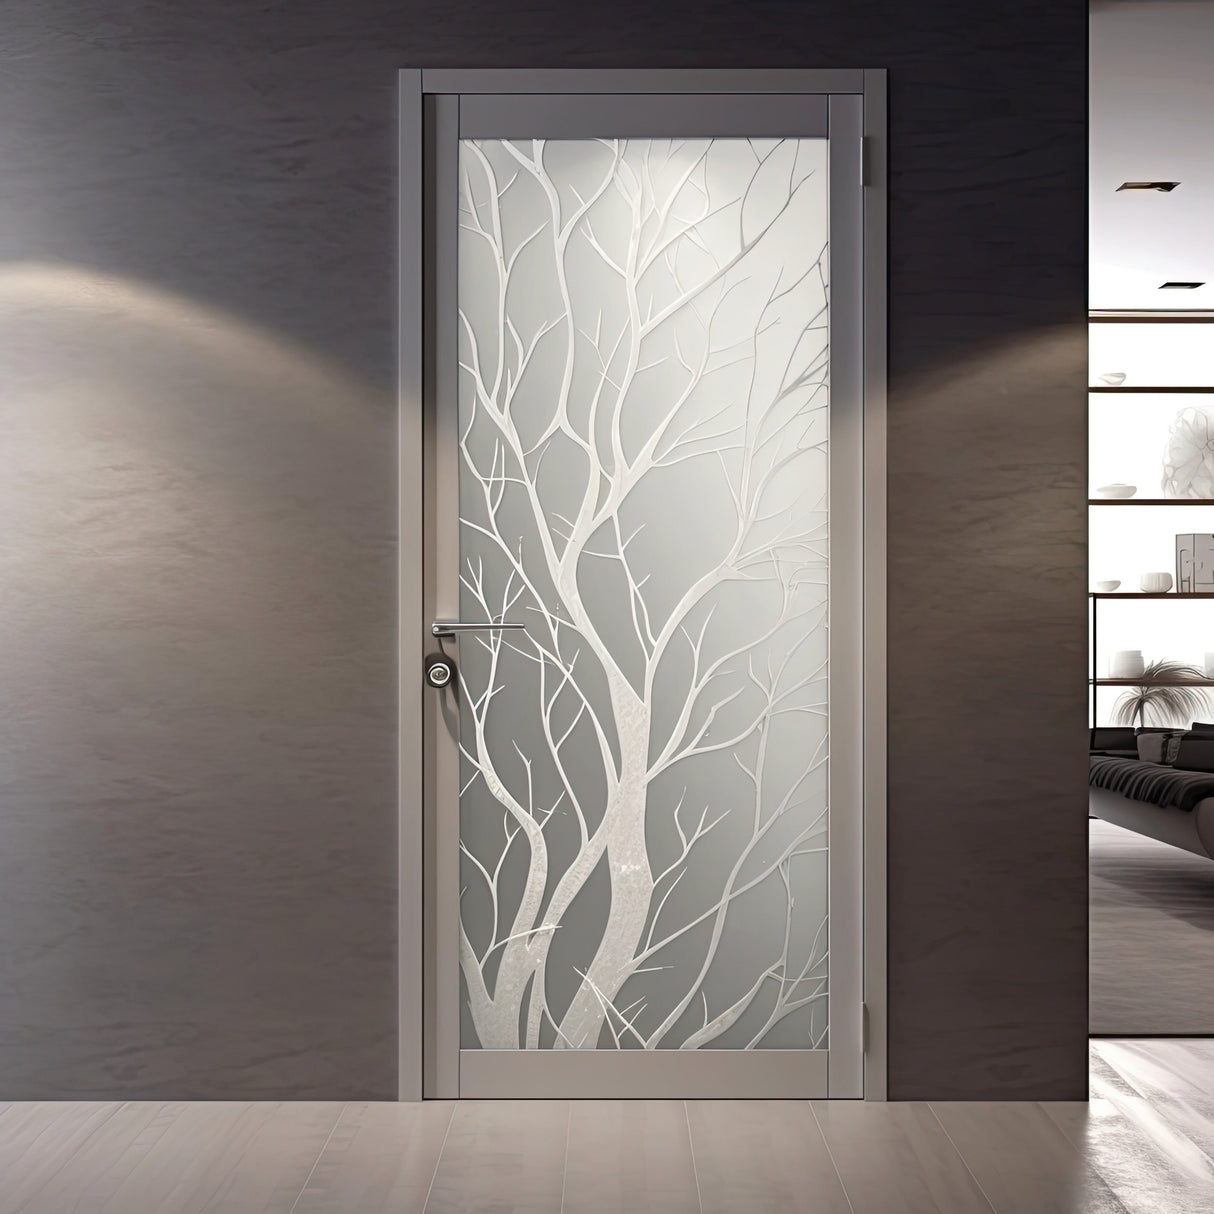 Frosted White Tree Silhouette Decal for Glass Door - Elegant Etched Branch Sticker Design for Window